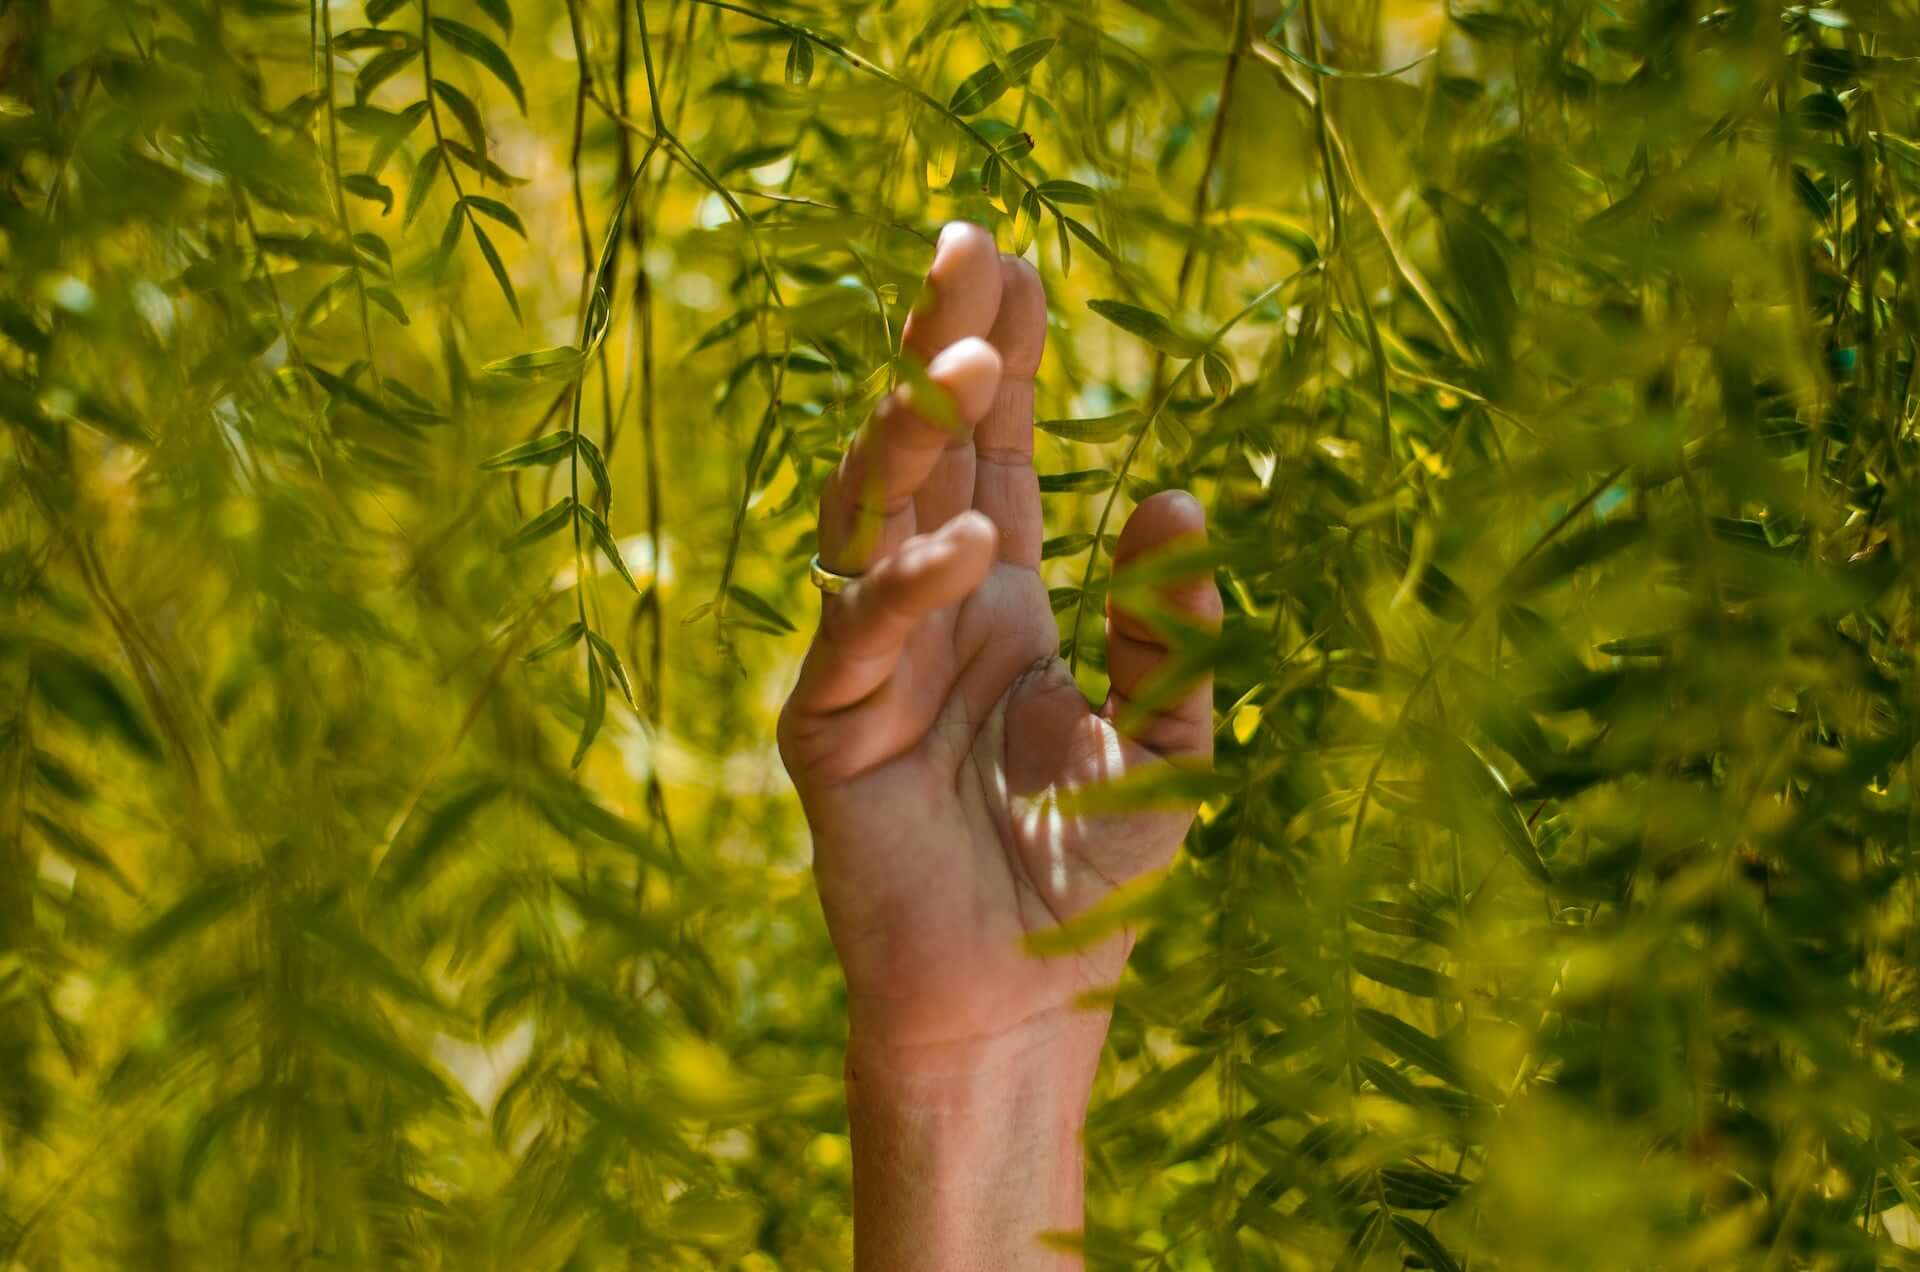 A hand reaches up into hanging green leaves.